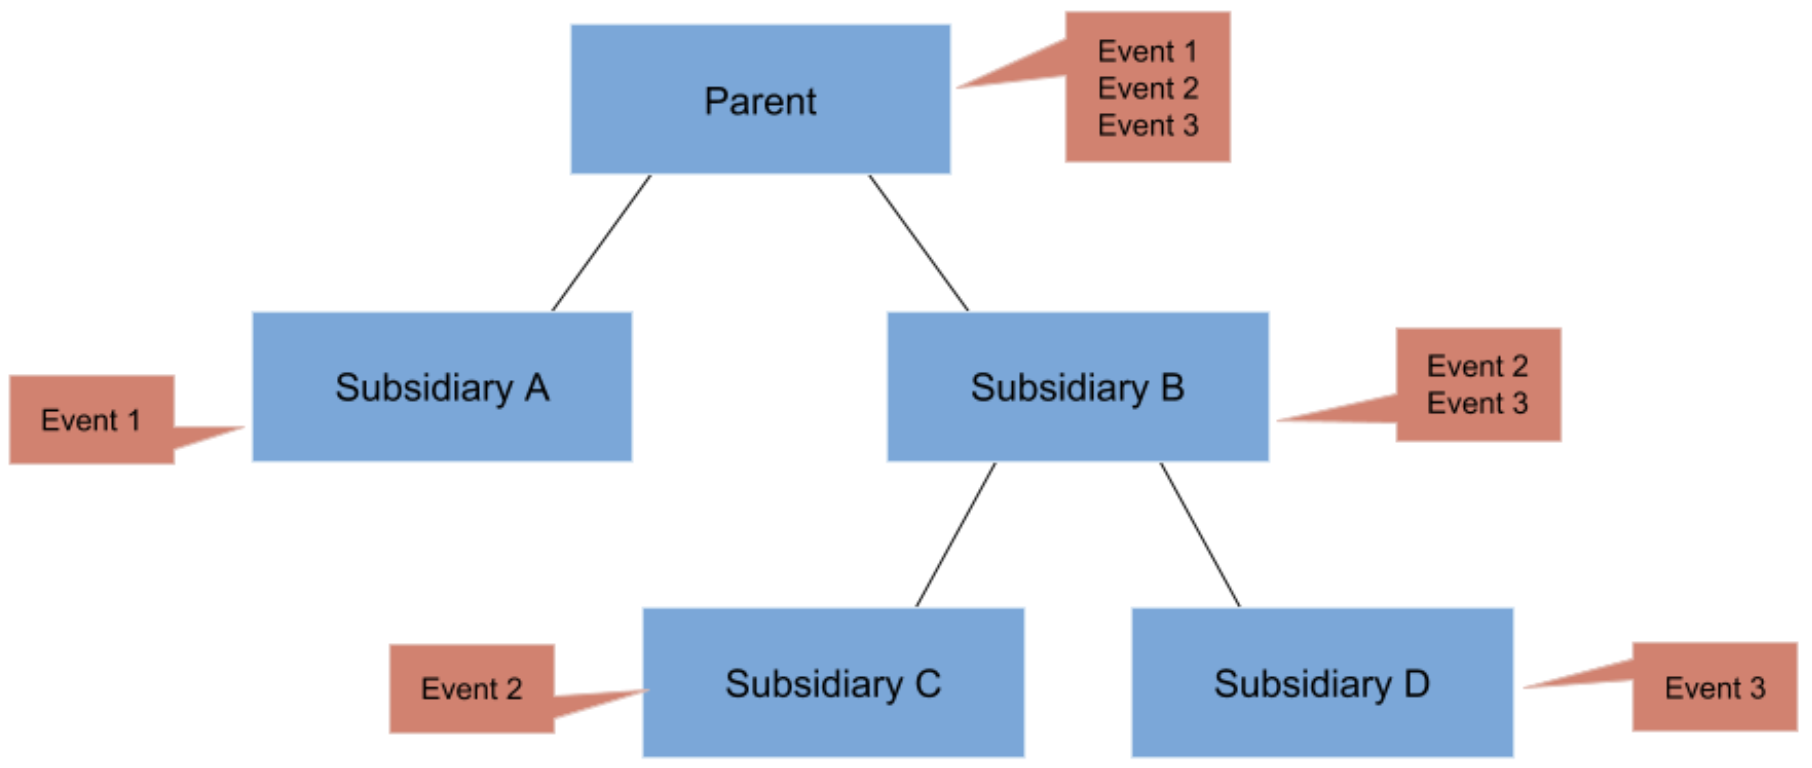 Asset Distribution in a Ratings Tree